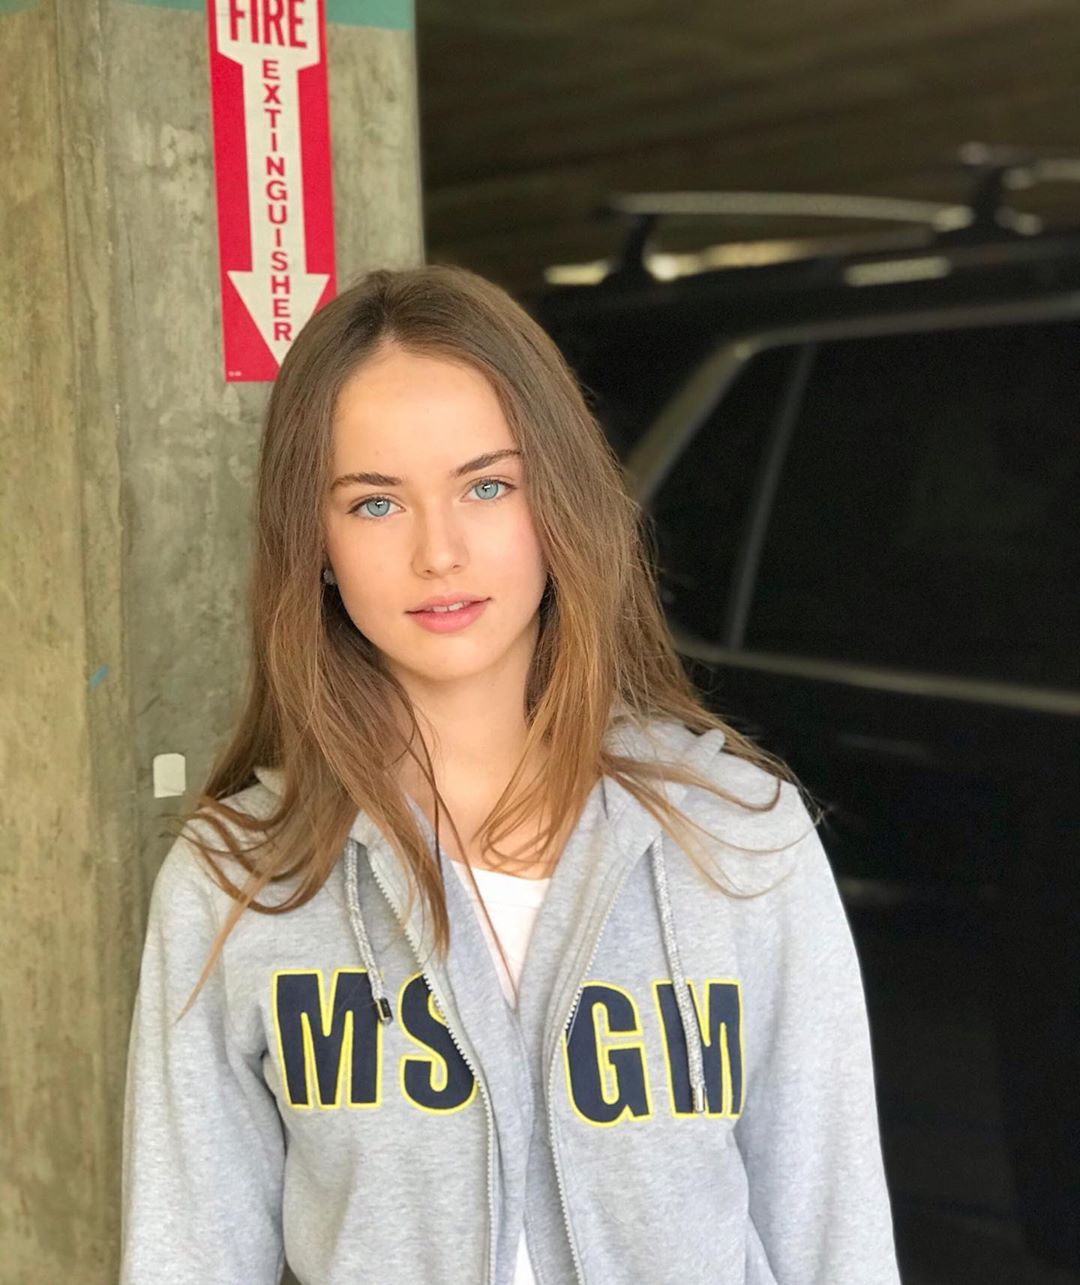 Kristina Pimenova blond hairstyle, Girls With Cute Face, Glossy Lips: Street Style,  Long hair,  Brown hair,  Blonde Hair,  Hairstyle Ideas,  Cute Instagram Girls,  Kristina Pimenova Pics  